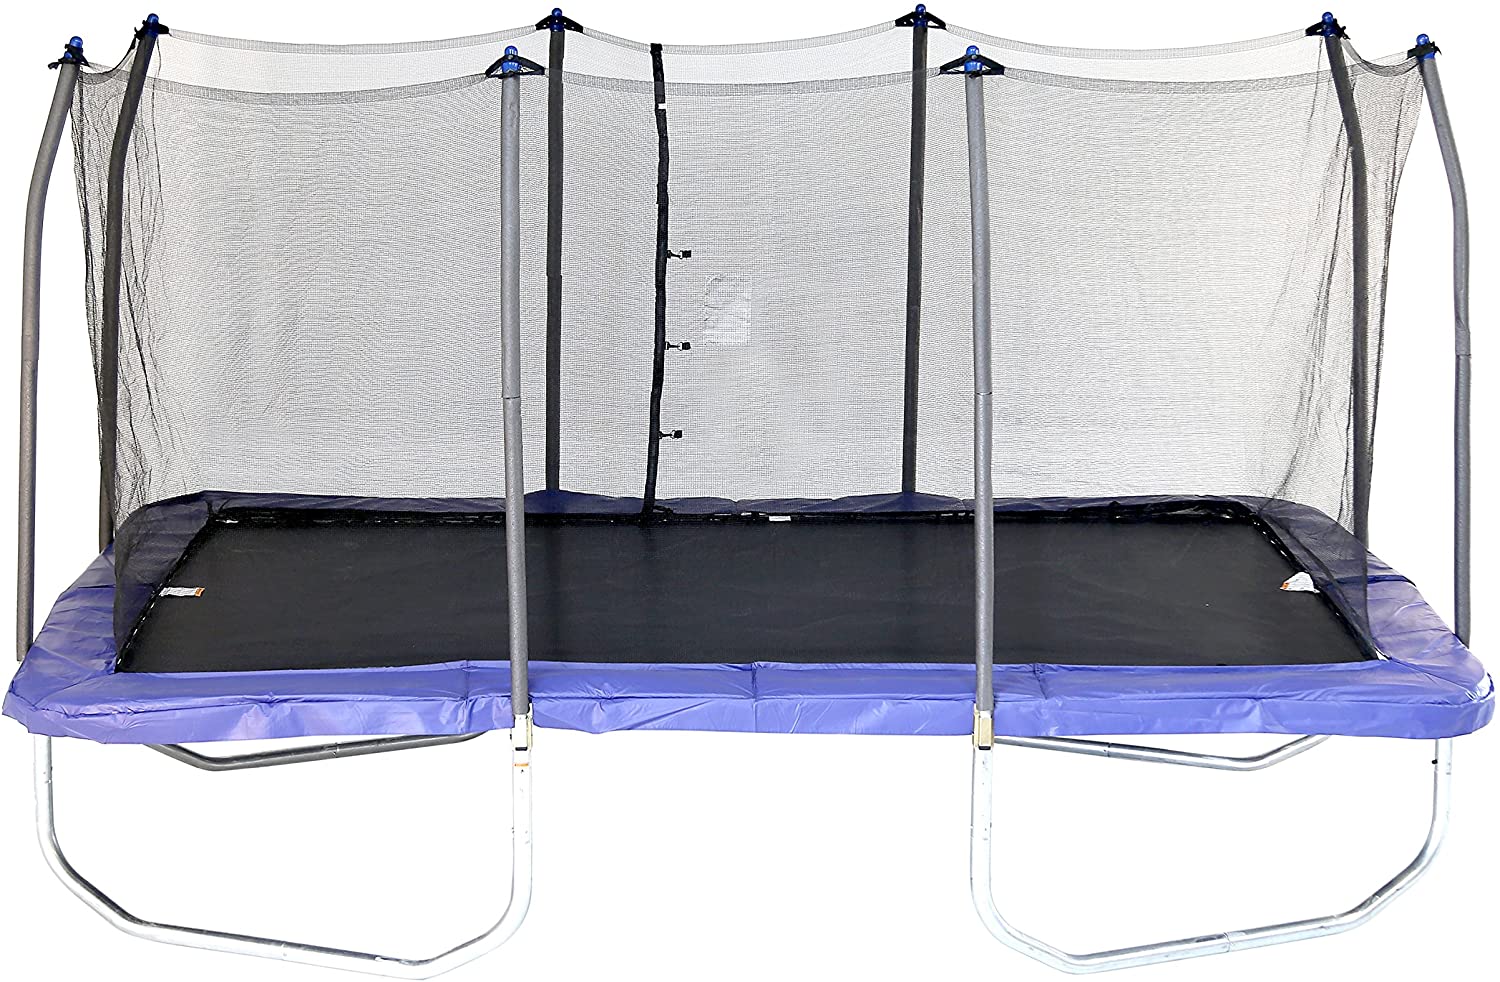 Skywalker Rectangl Trampoline with Enclosure Review